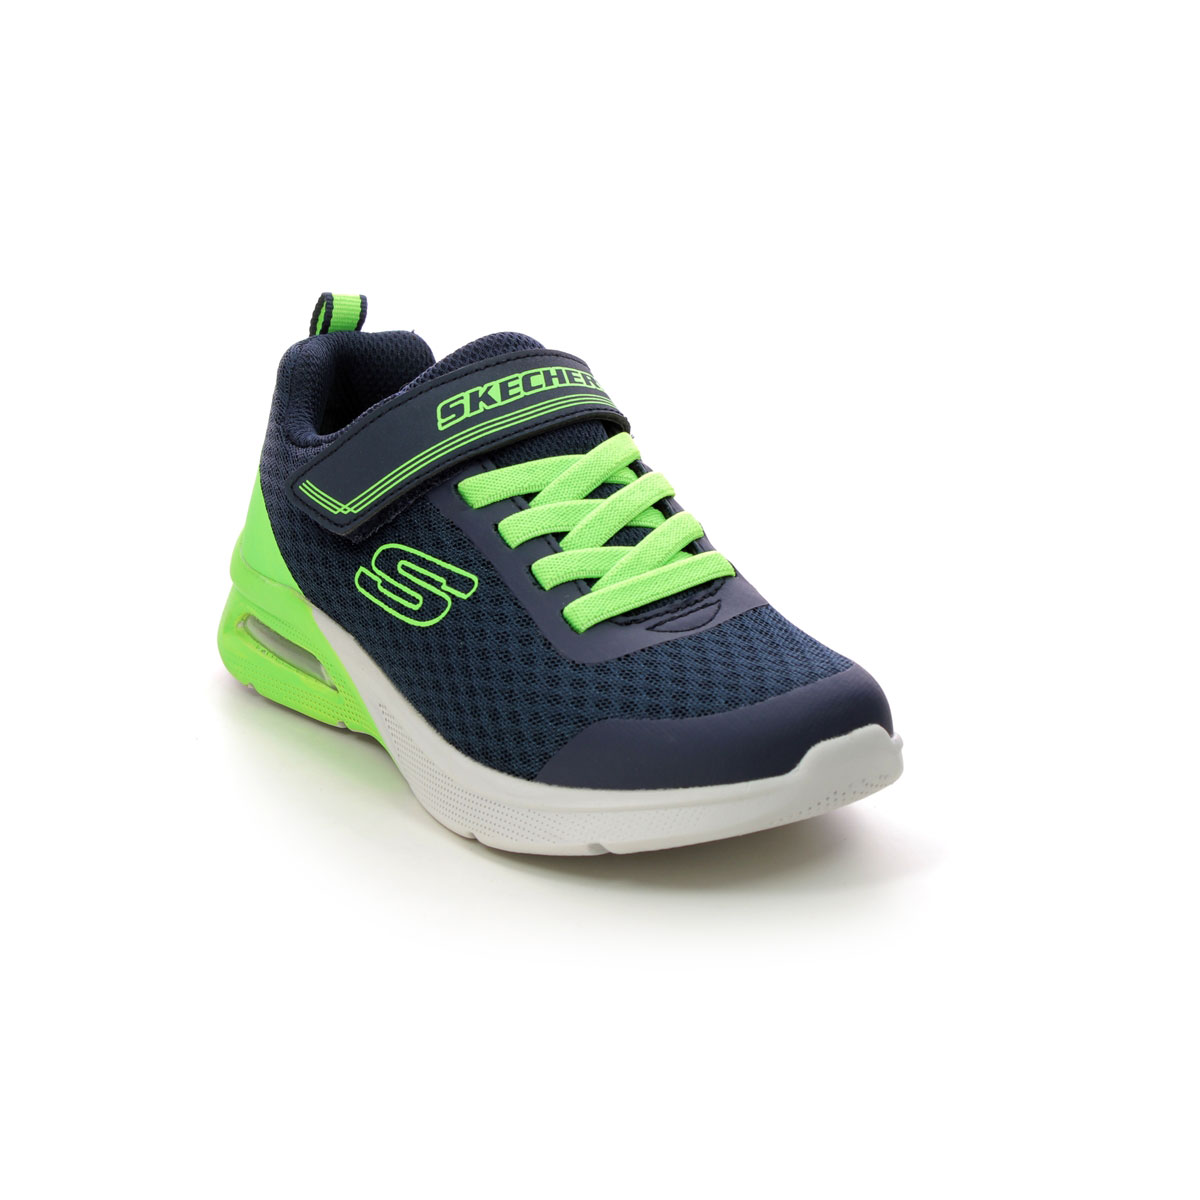 Skechers Microspec Max Navy Lime Kids Trainers 403773L In Size 35 In Plain Navy Lime For kids